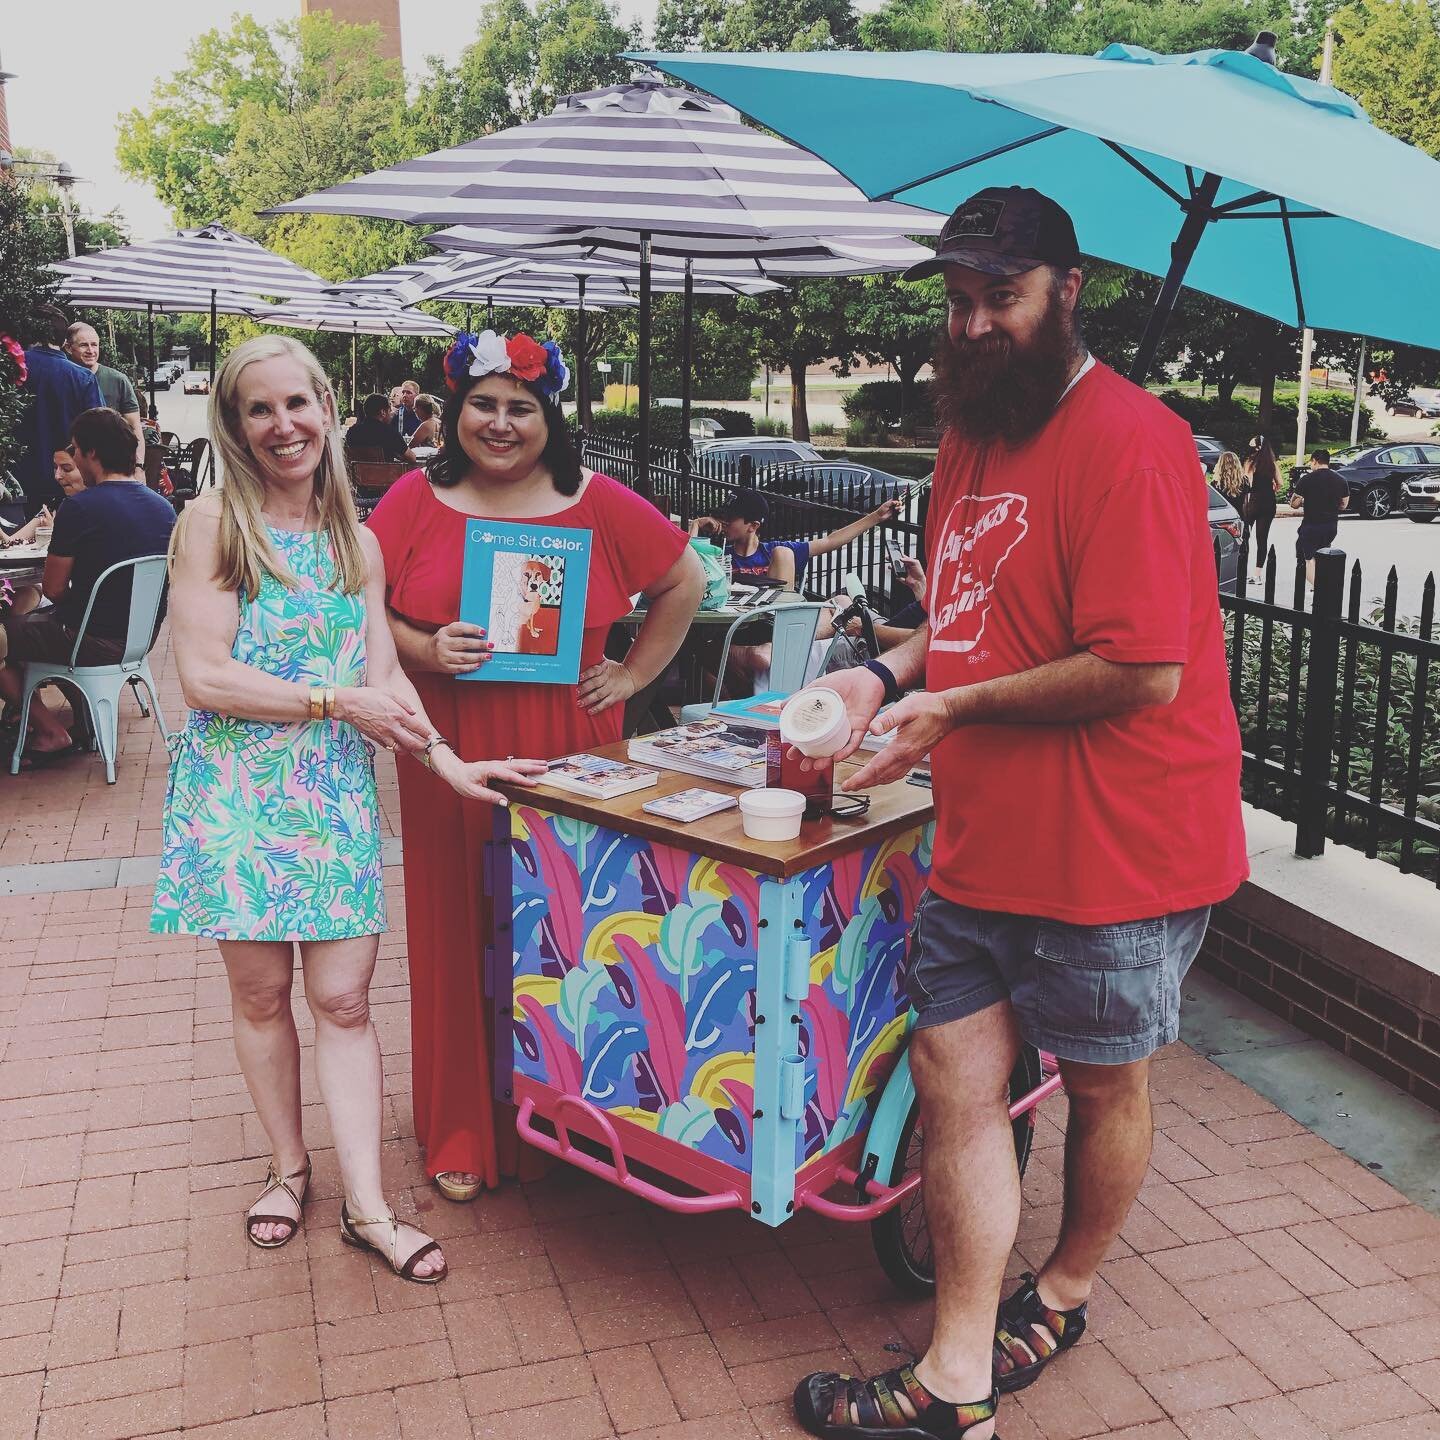 Thank you to all who came out last night to purchase @benevolenthound dog ice cream at the @whitedogwayne to benefit @alphabravocanine 

The Benevolent Hound mission is to promote and provide resources, educational tools and partnership opportunities